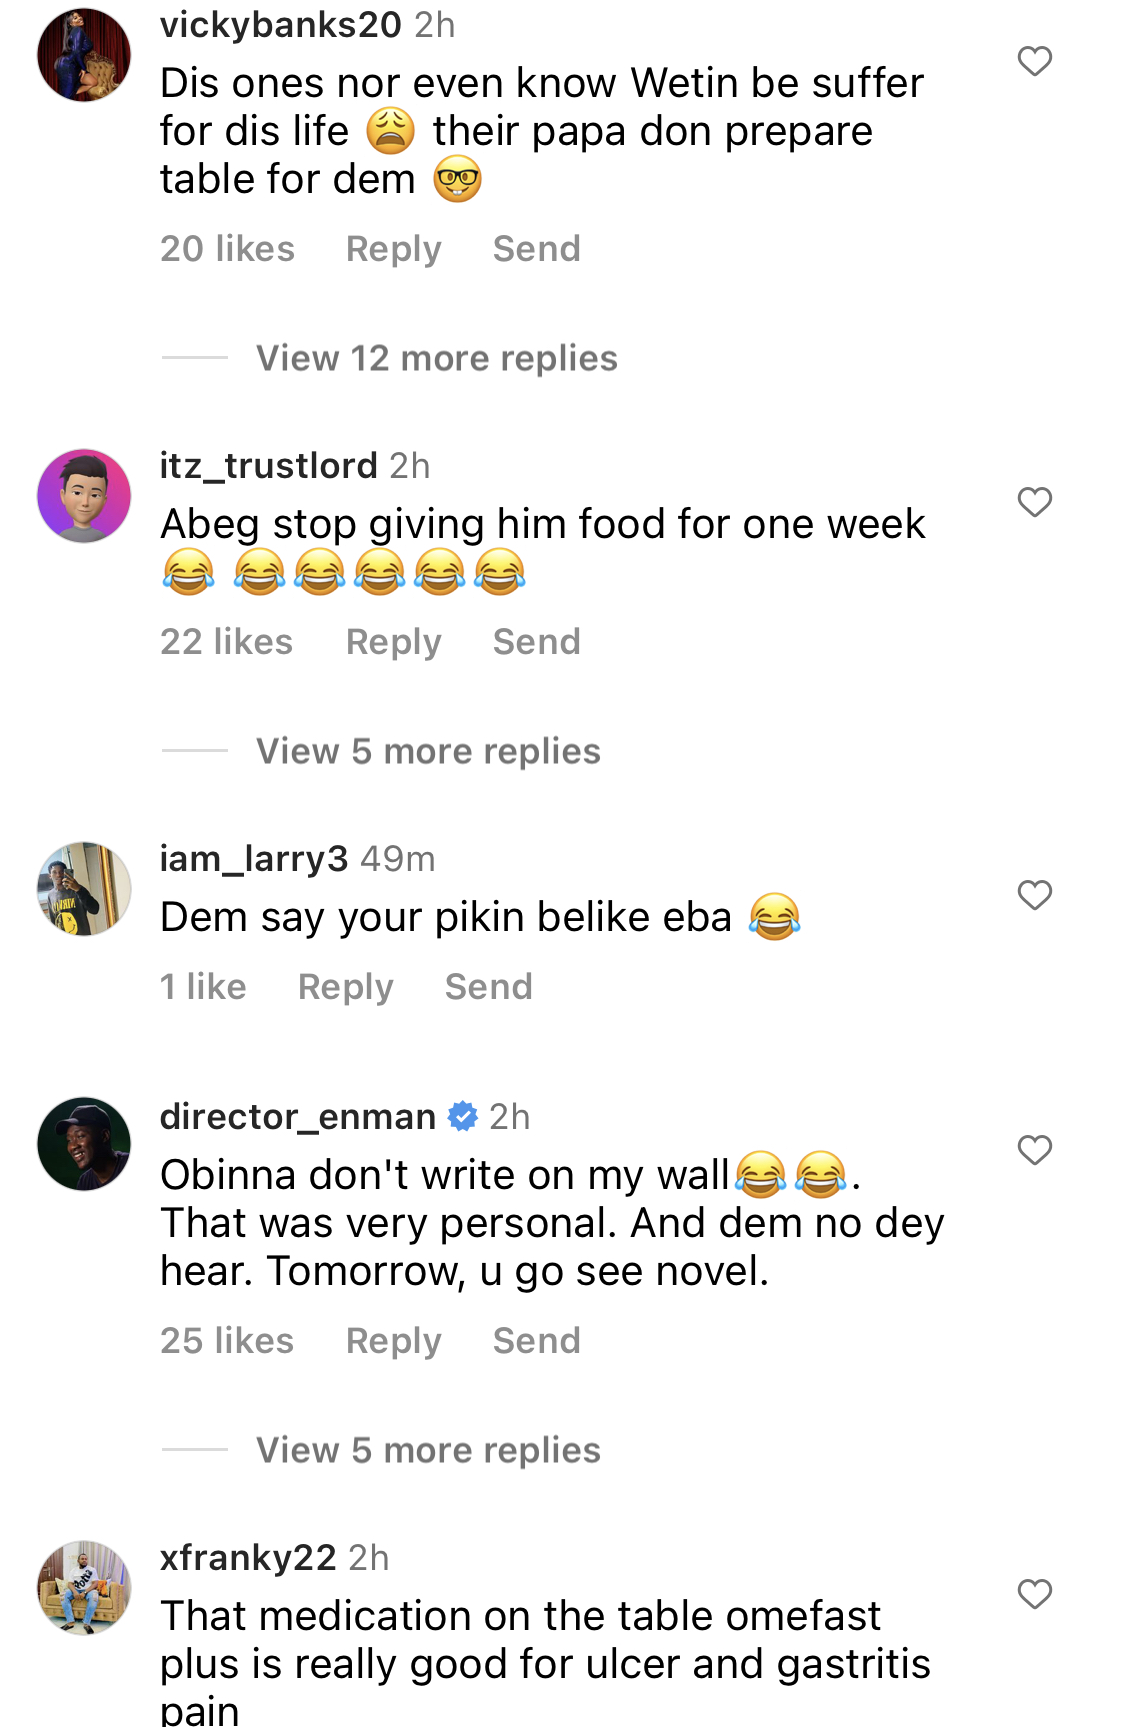 Lion no day born goat - Fans react to striking resemblance of Cubana Chief priest to son Obinna [video]